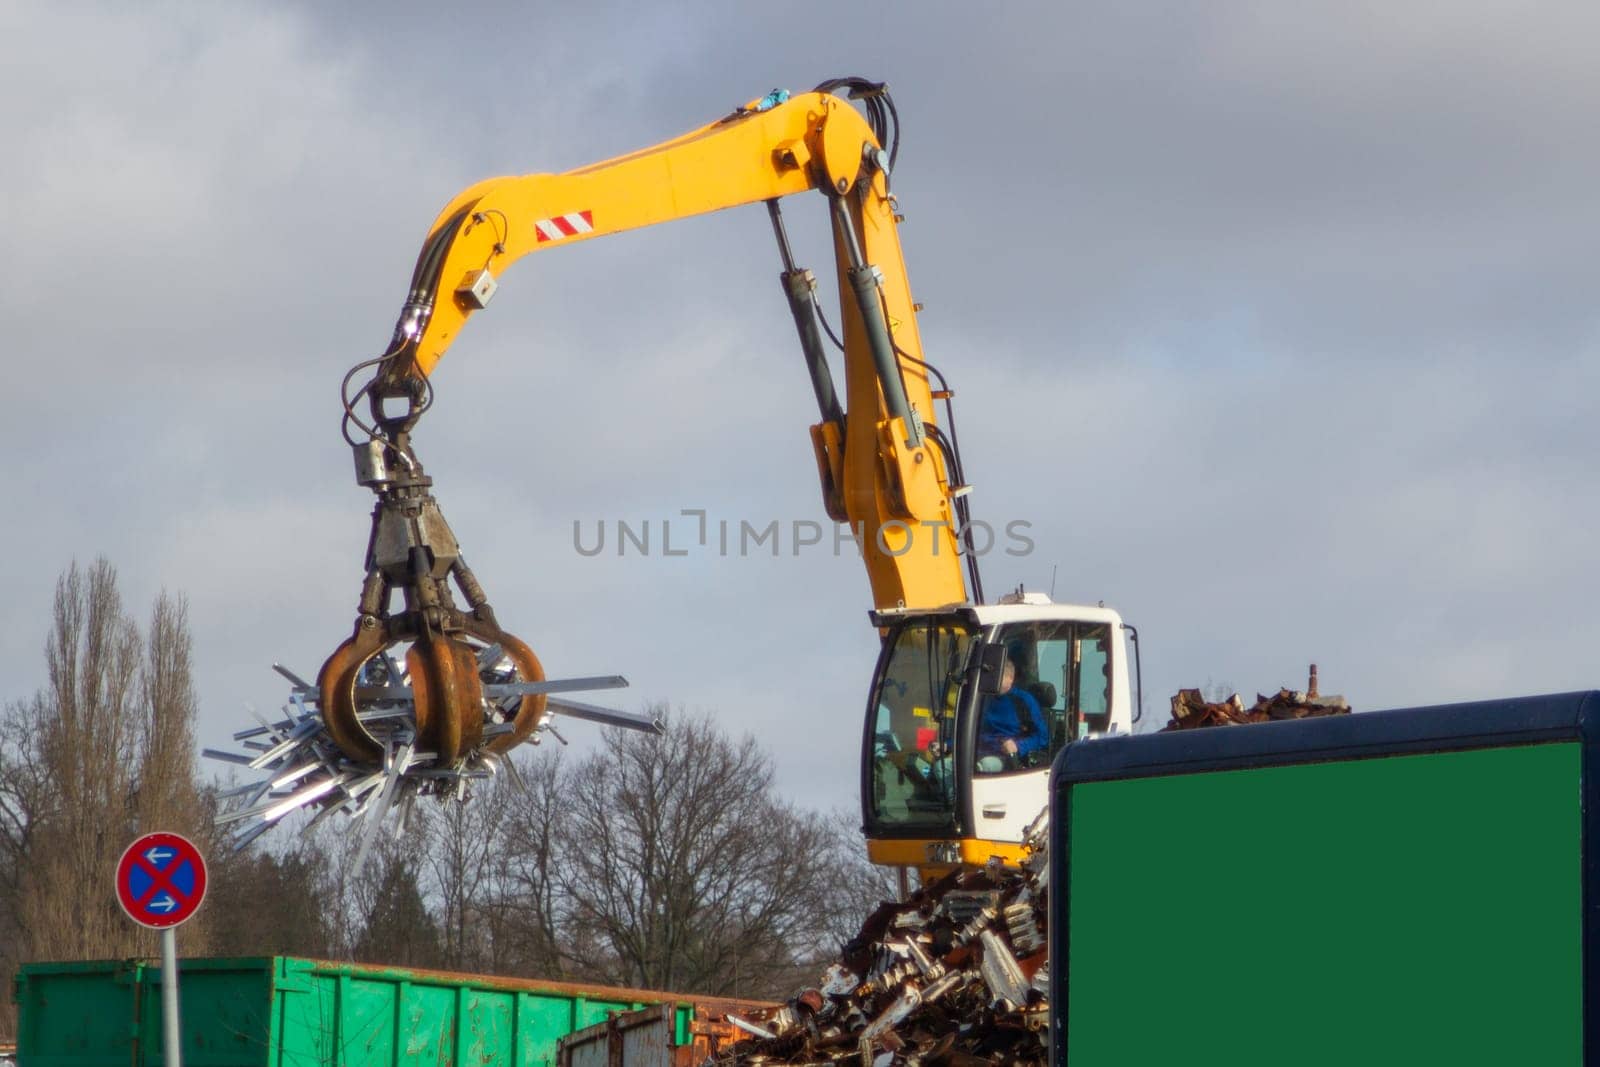 Metal Compactor at the Recycling Center. High quality photo